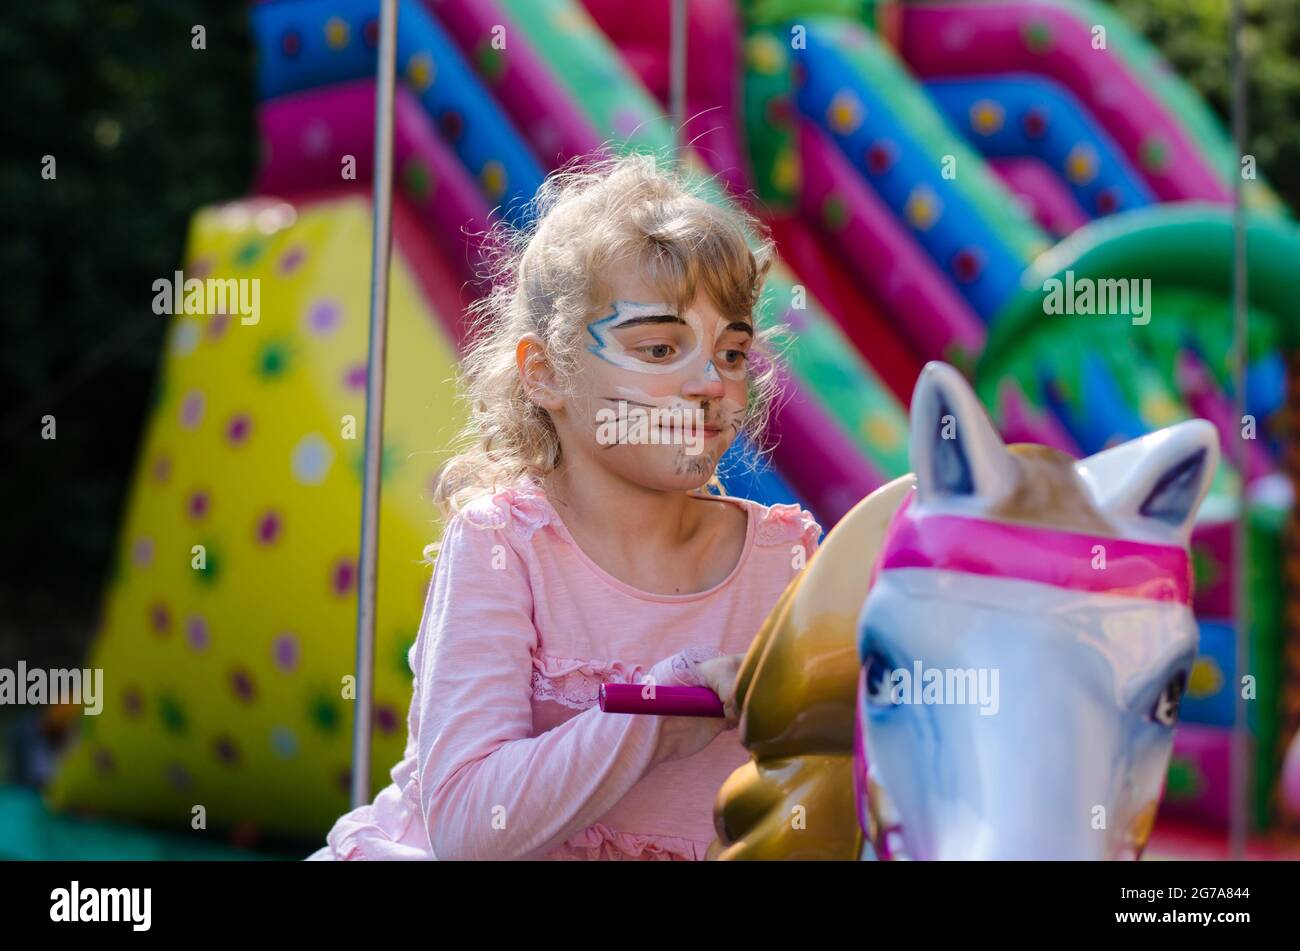 girl with face-painting of cat in marry-go-round Stock Photo